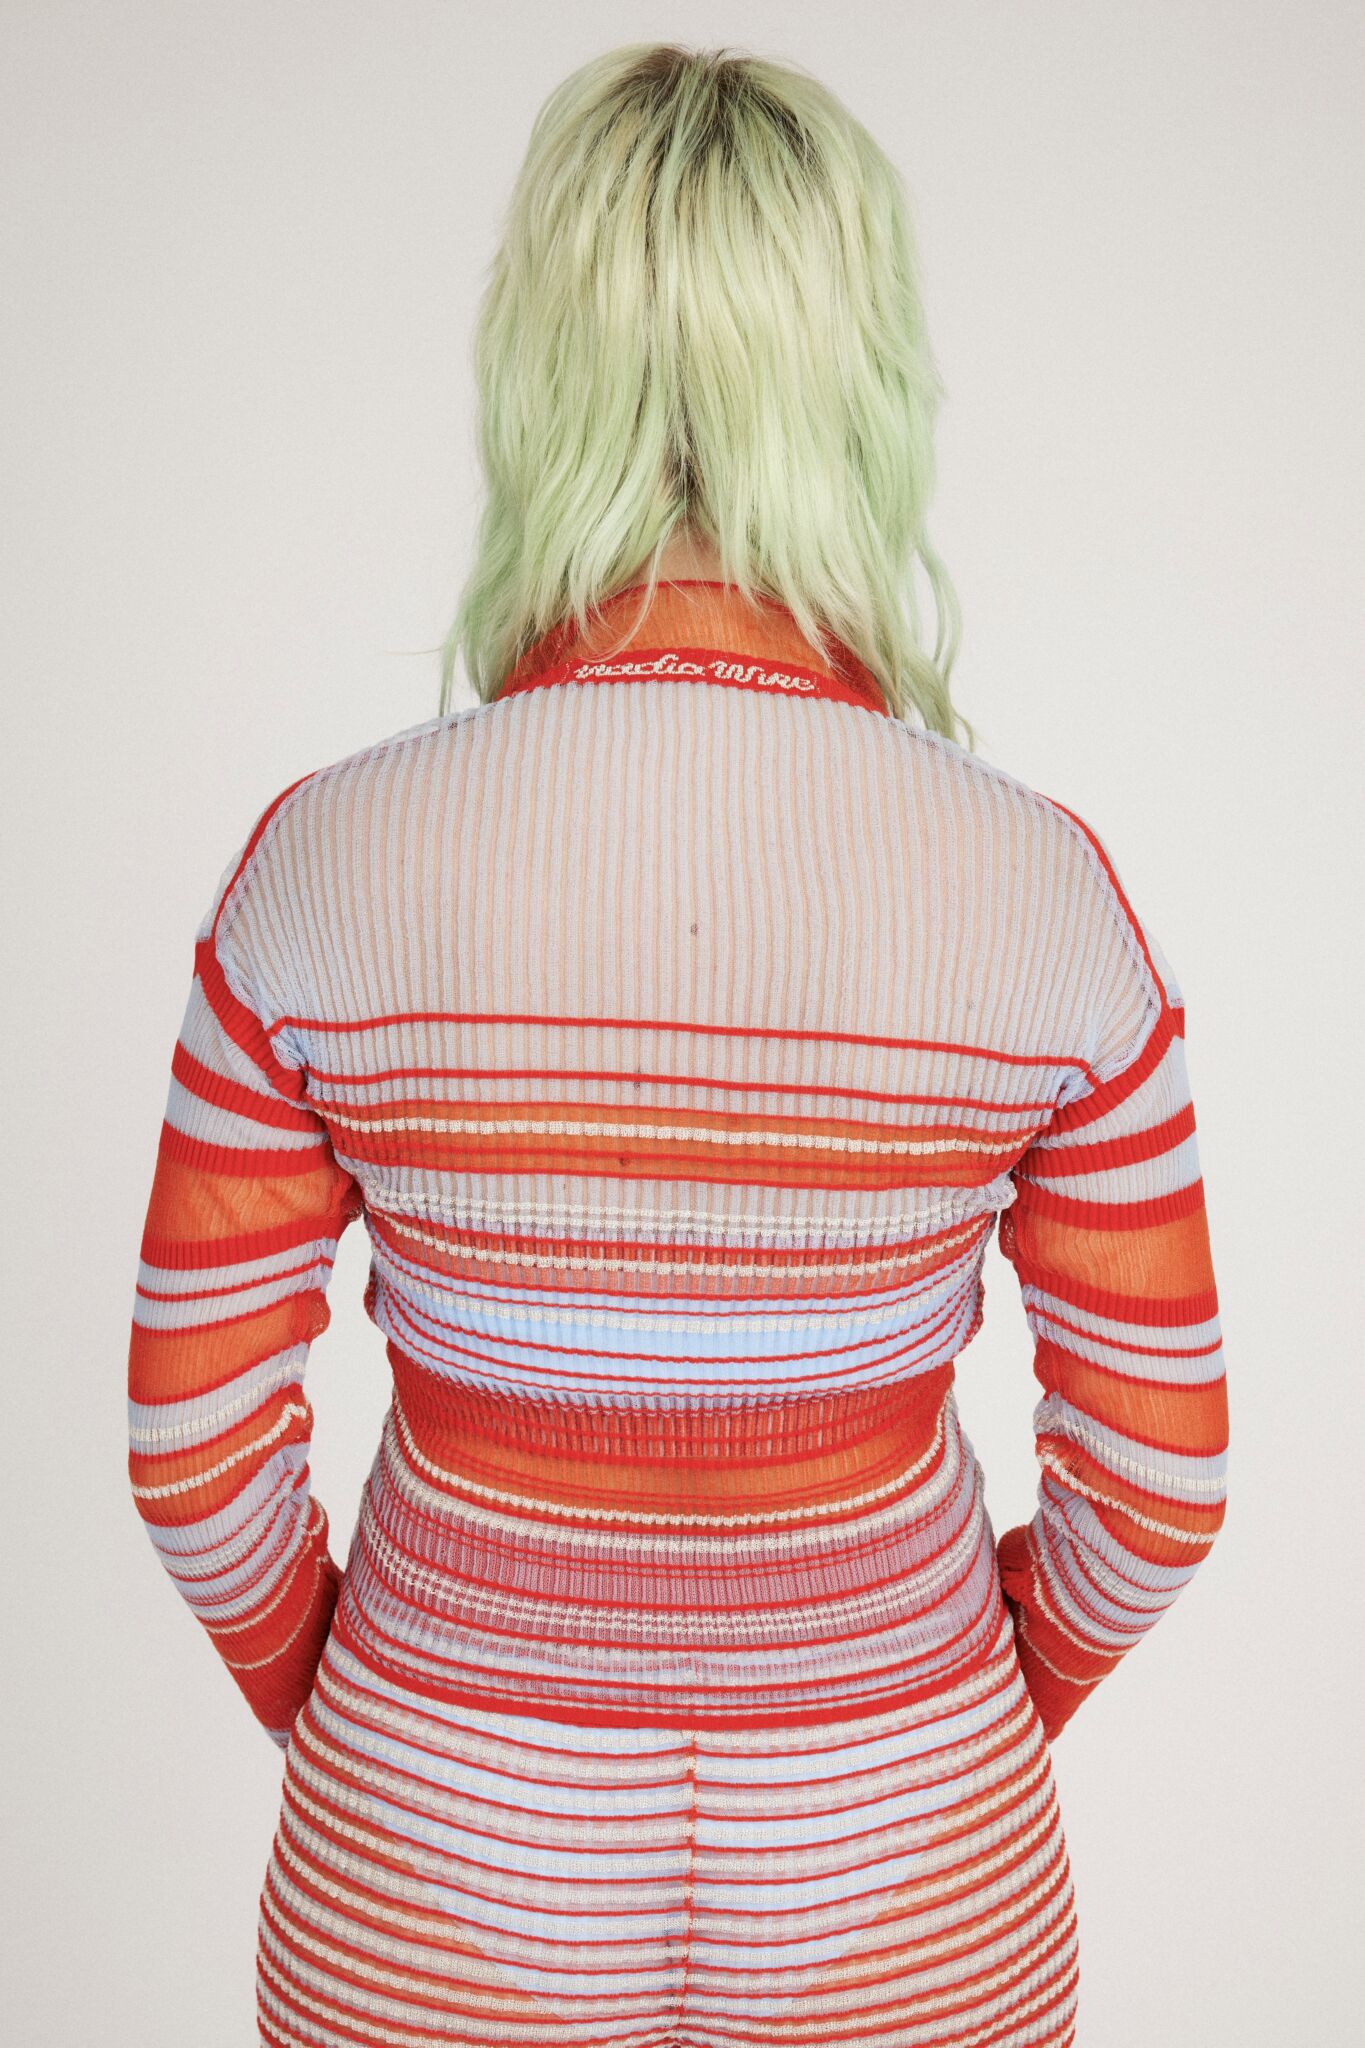 Sweet Secret Jumper in coral red and light blue is a knitted transparent high neck jumper in all over bold stripes detailed with shimmery metallized yarn. The textile is lightweight, delicate and very flexible. The jumper has a body fitted silhouette that adapts to the body. Detailed with frills and a logo in the back of the neck.